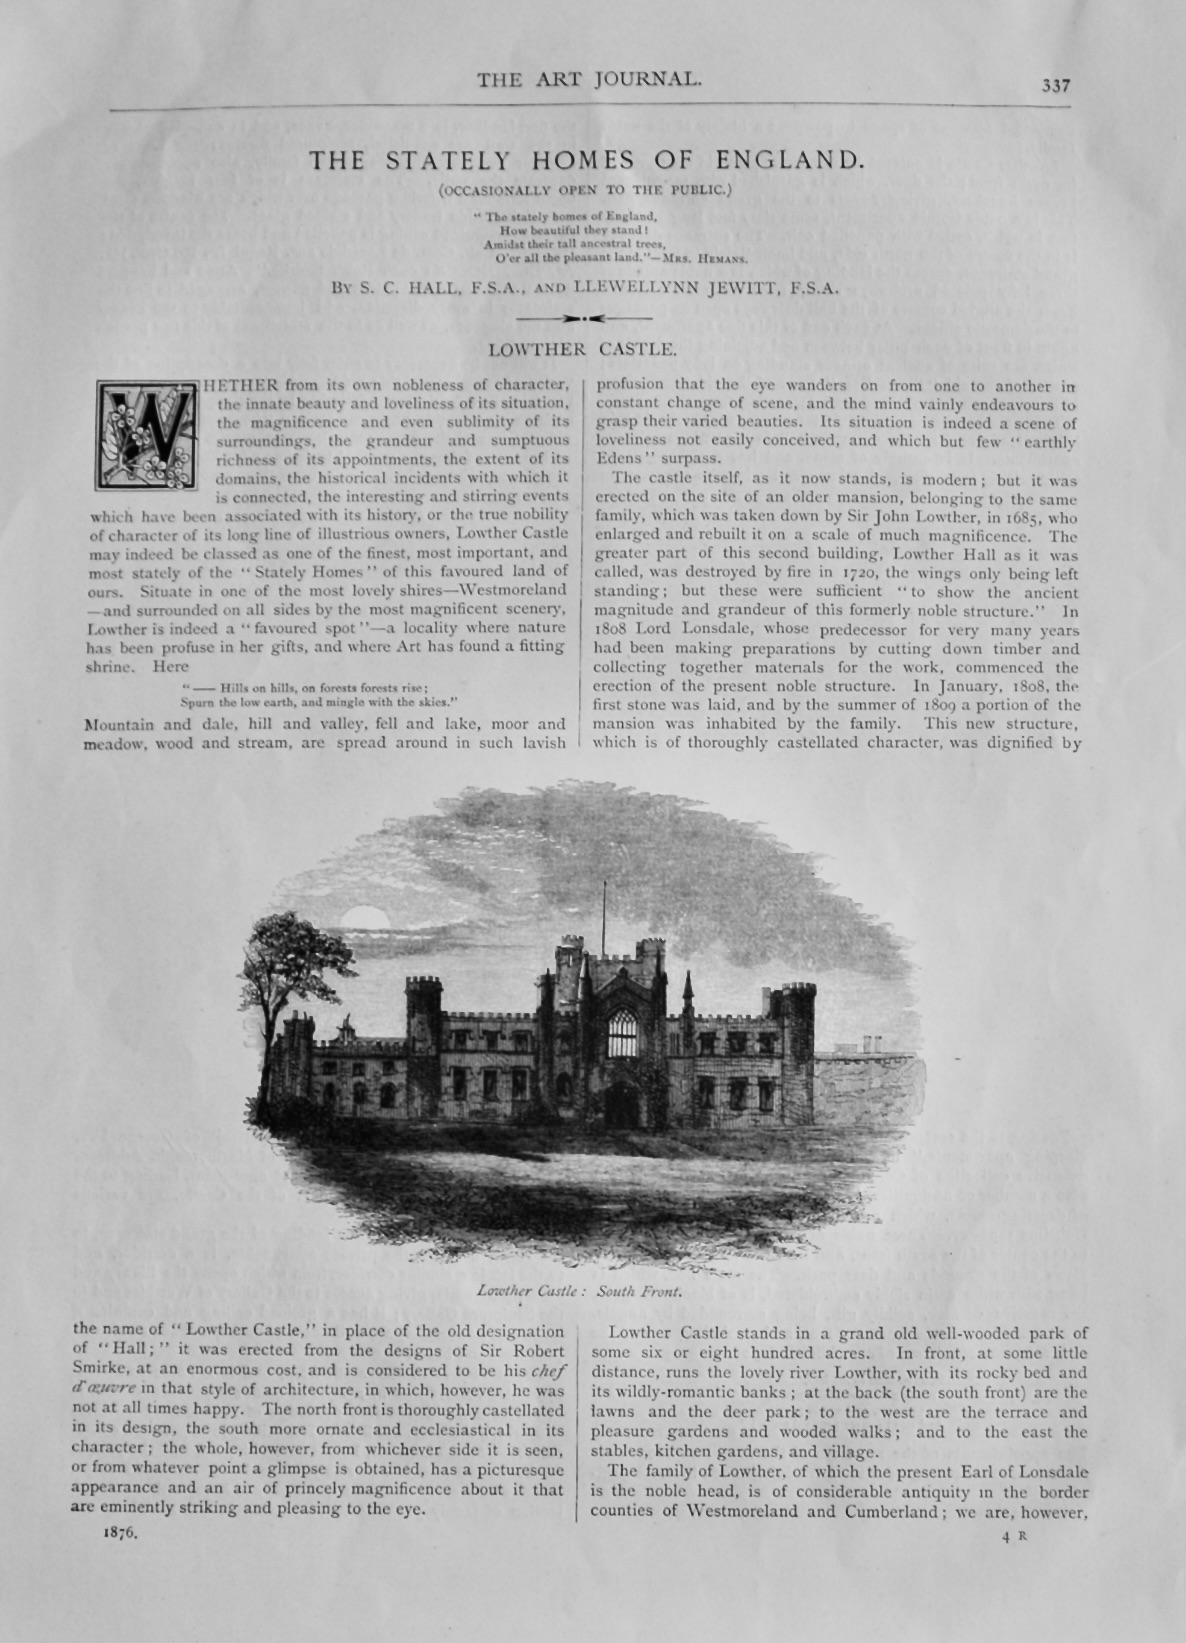 The Stately Homes of England. :  Lowther Castle. 1876.